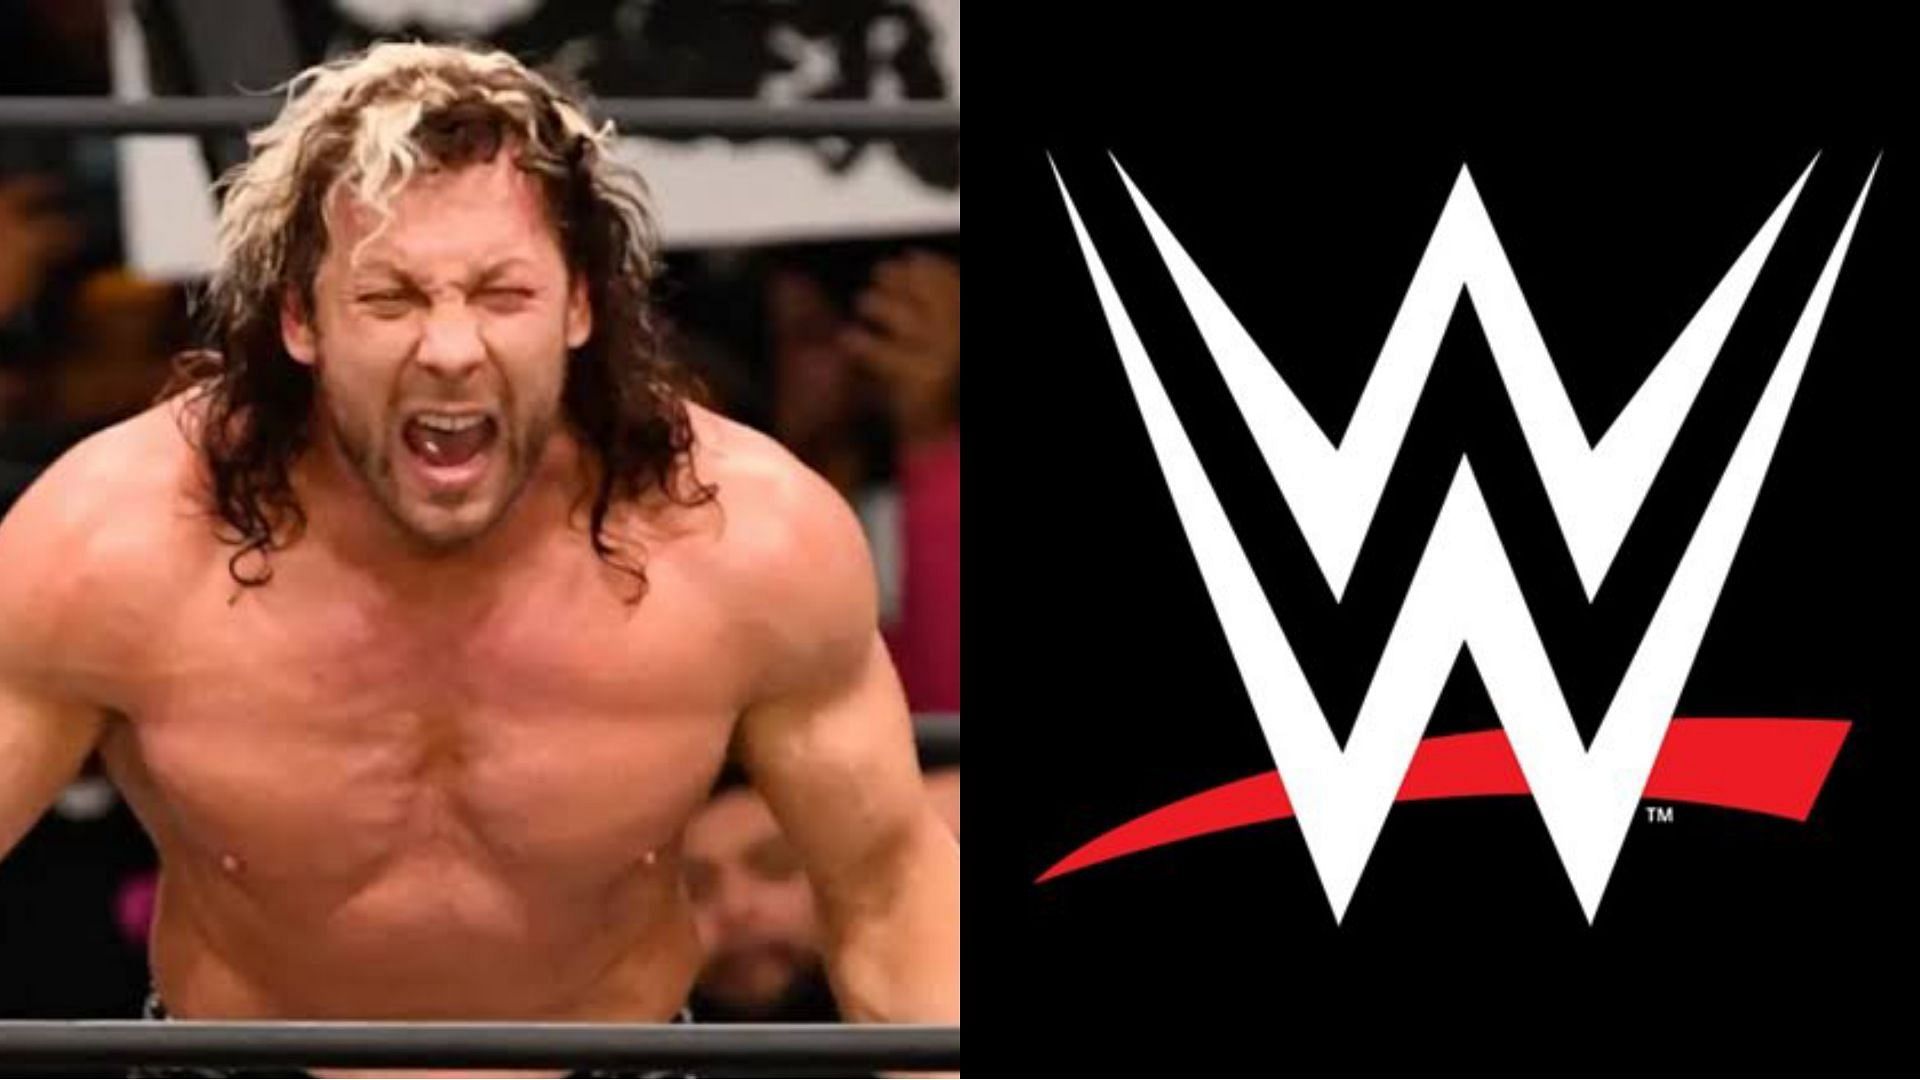 Kenny Omega recently announced that he will be out indefinitely